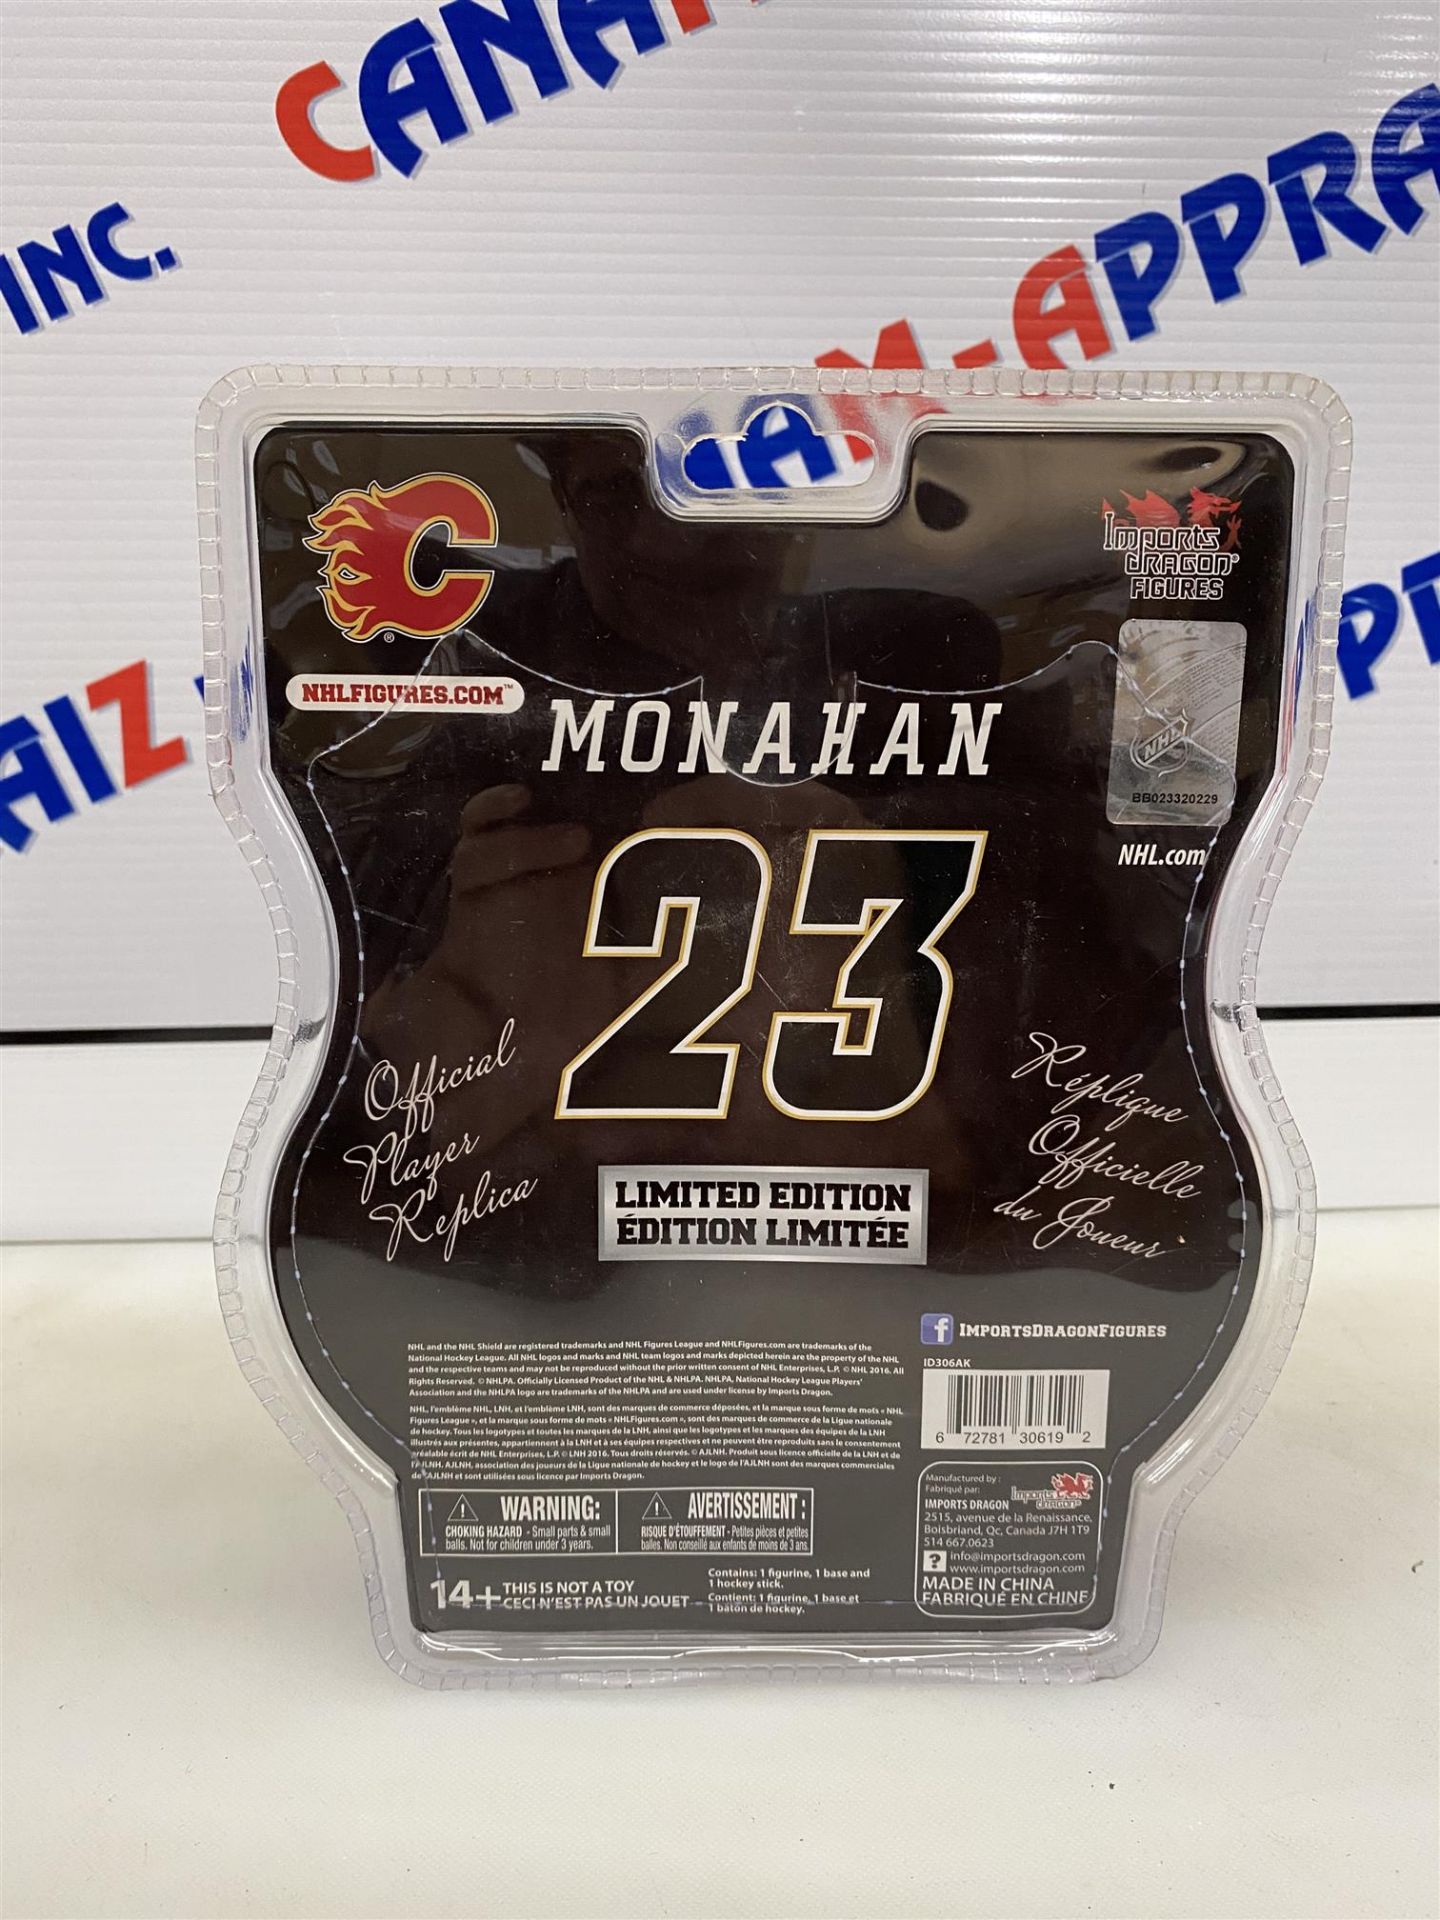 Limited Edition NHL-pa- (Player Figure) CALGARY FLAMES - MONAHAN 23 - Image 2 of 2